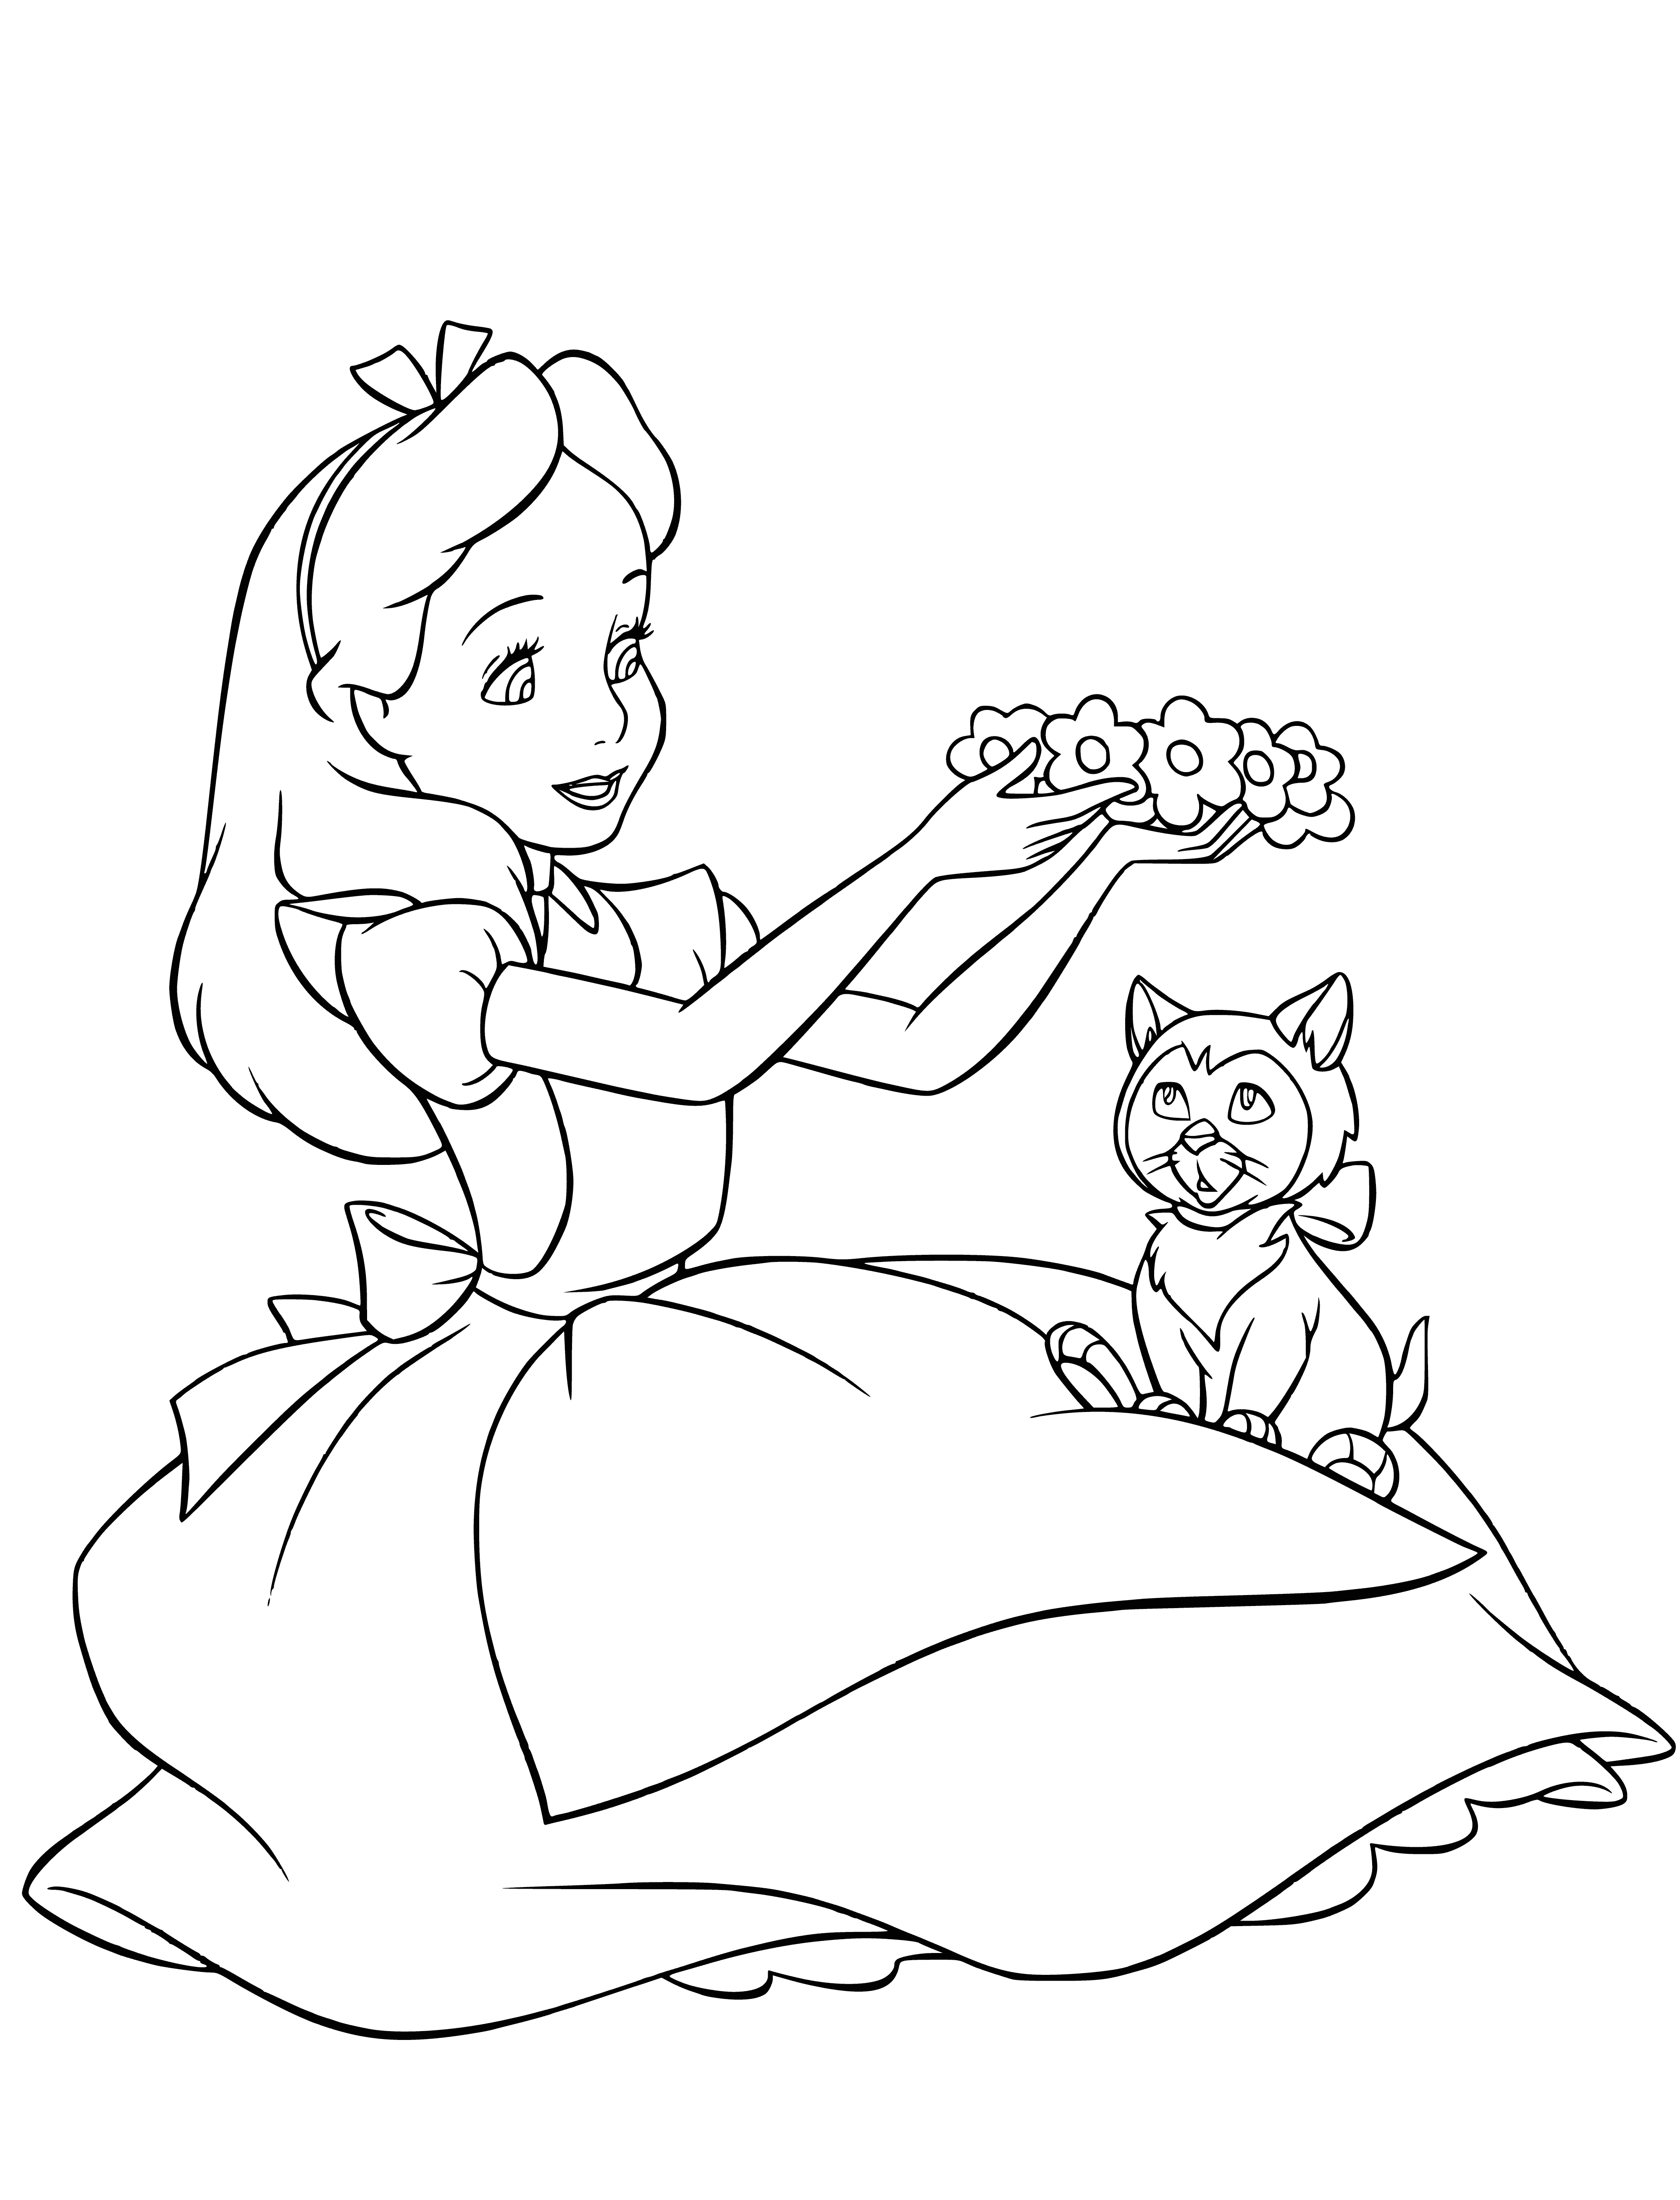 coloring page: Alice in blue dress, hair tied back, playing with black & white kitten on her lap. #girlwithakitten